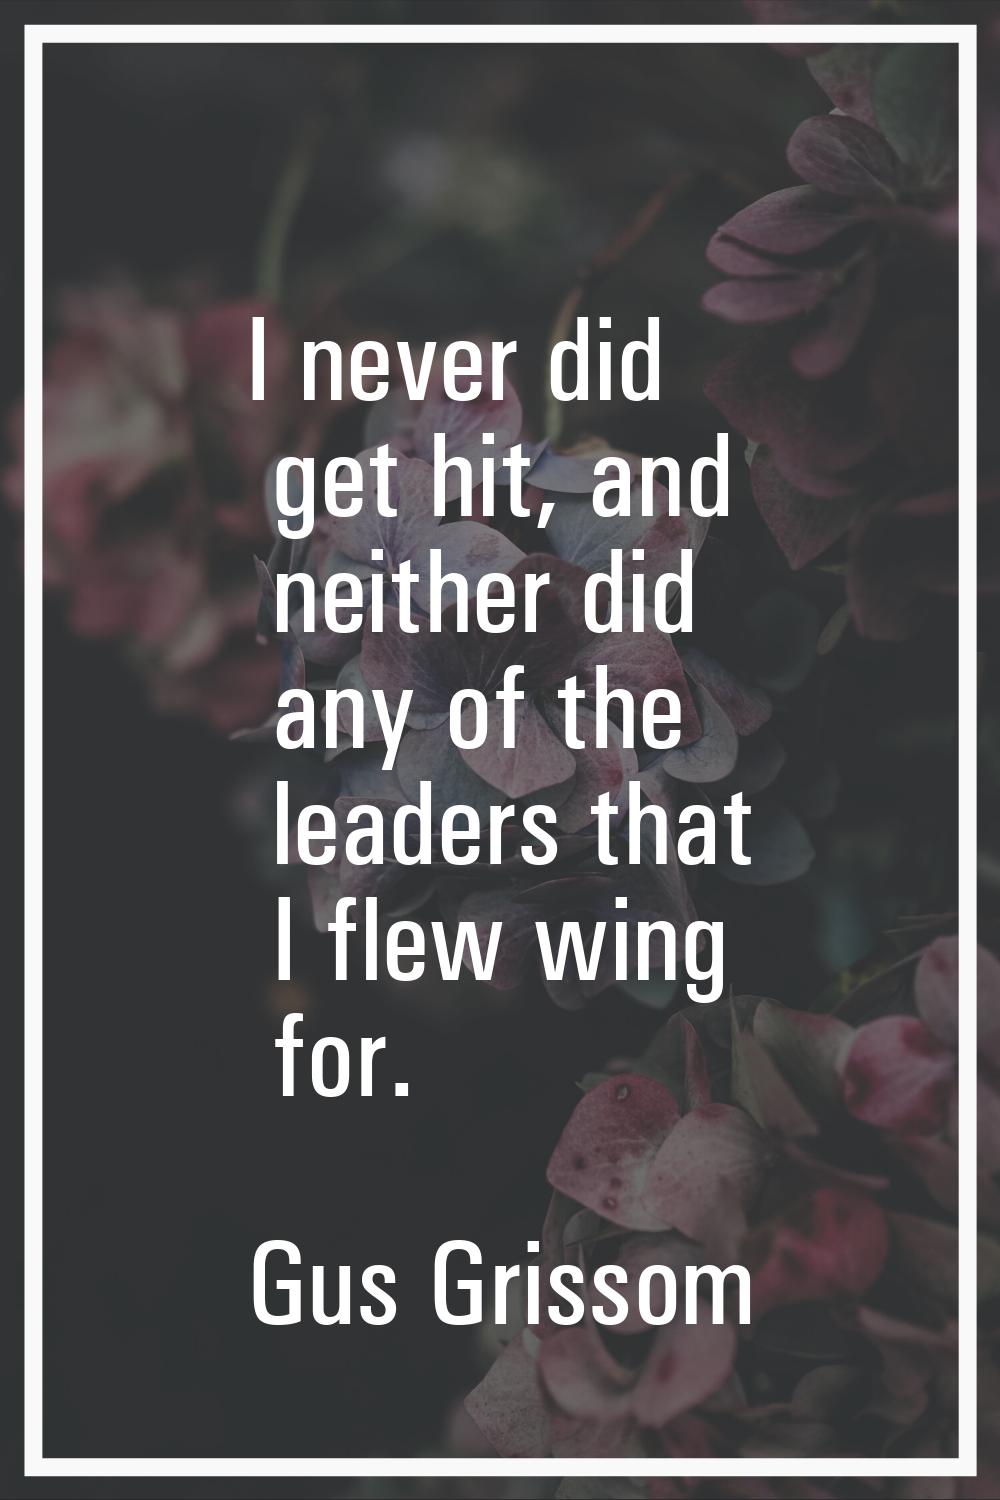 I never did get hit, and neither did any of the leaders that I flew wing for.